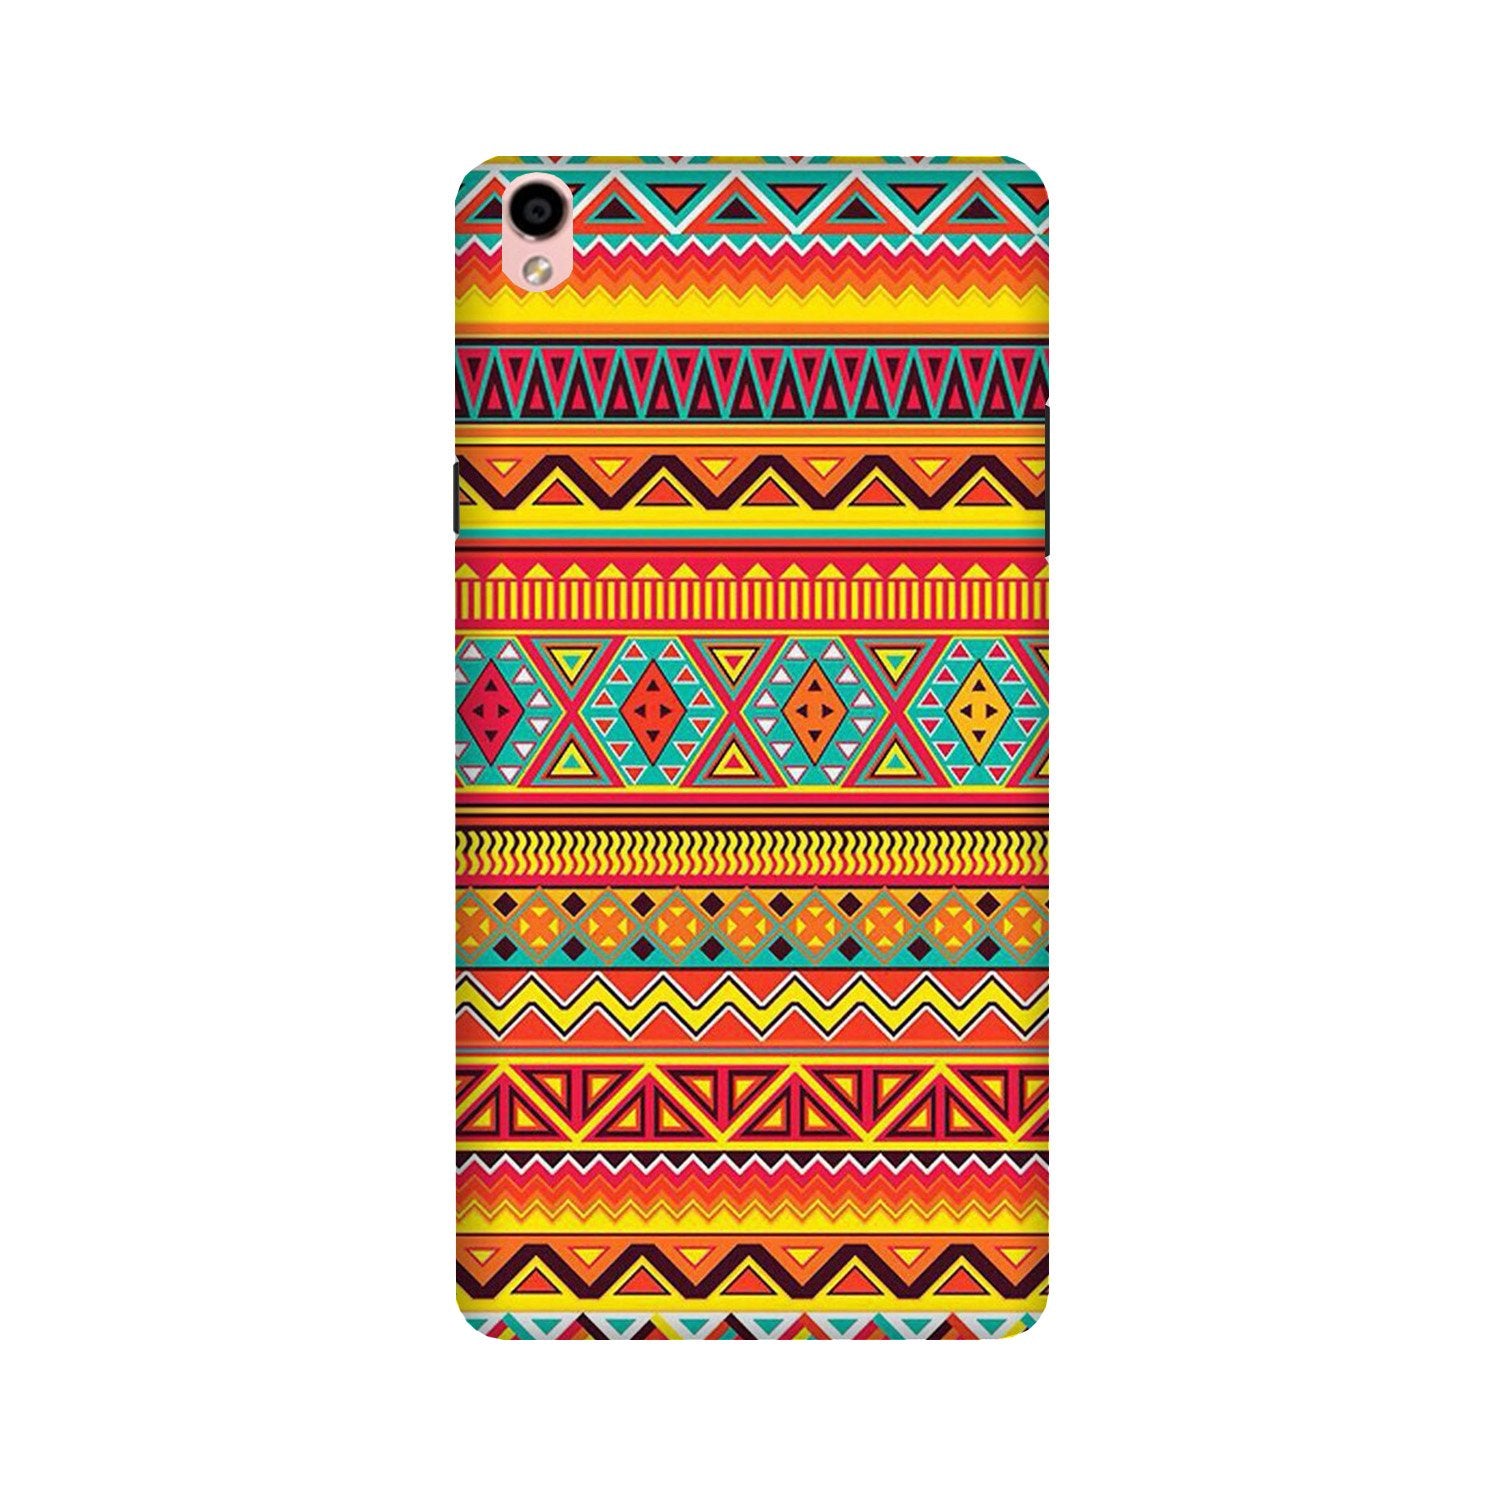 Zigzag line pattern Case for Oppo F1 Plus